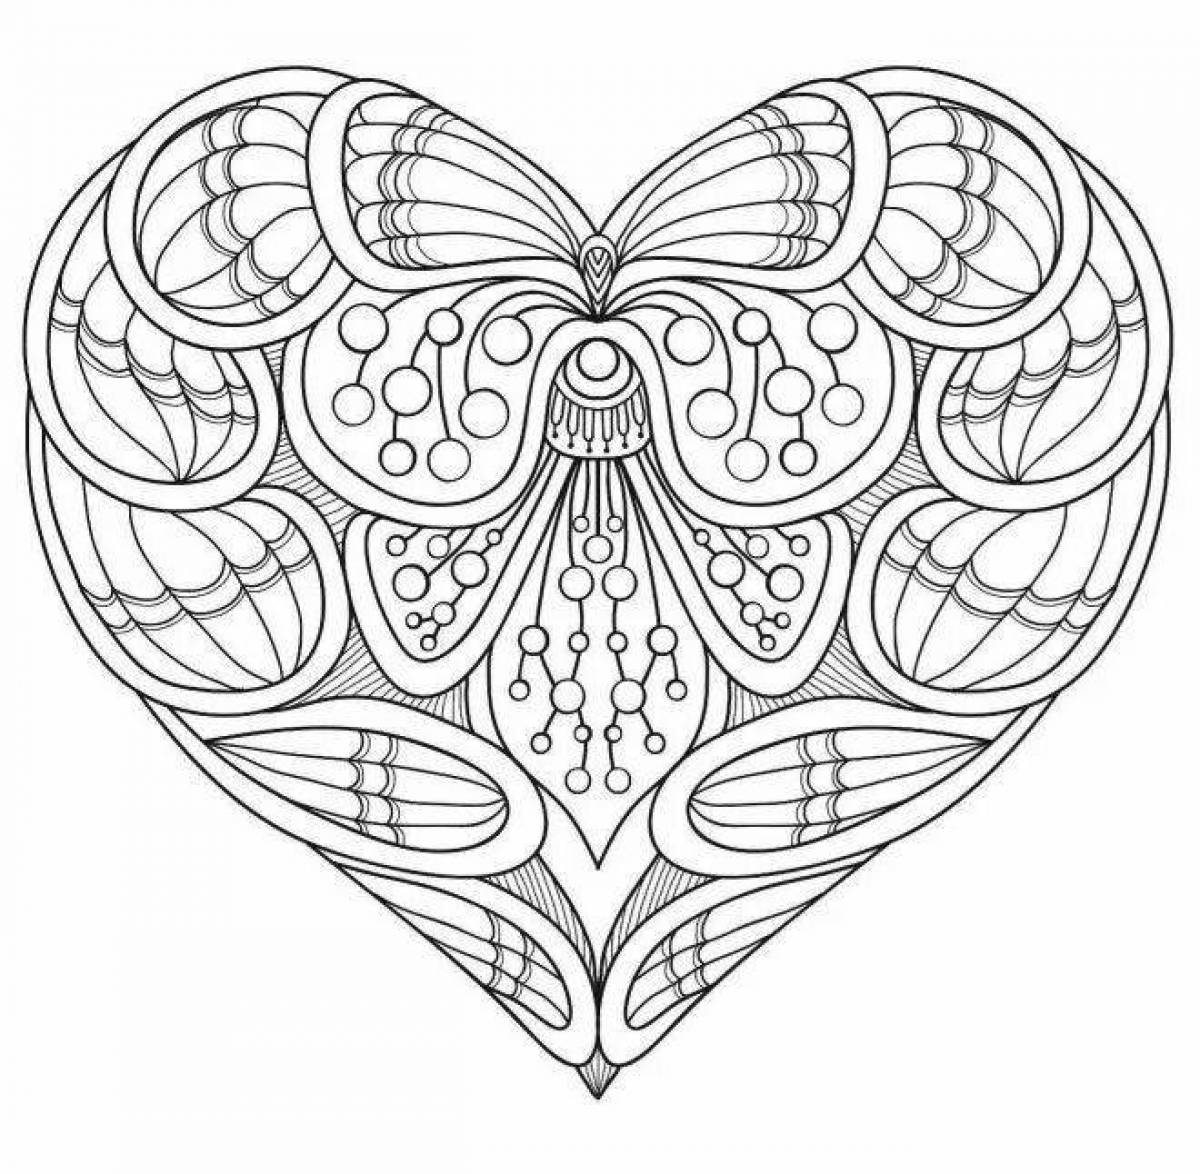 Lovely heart anti-stress coloring book